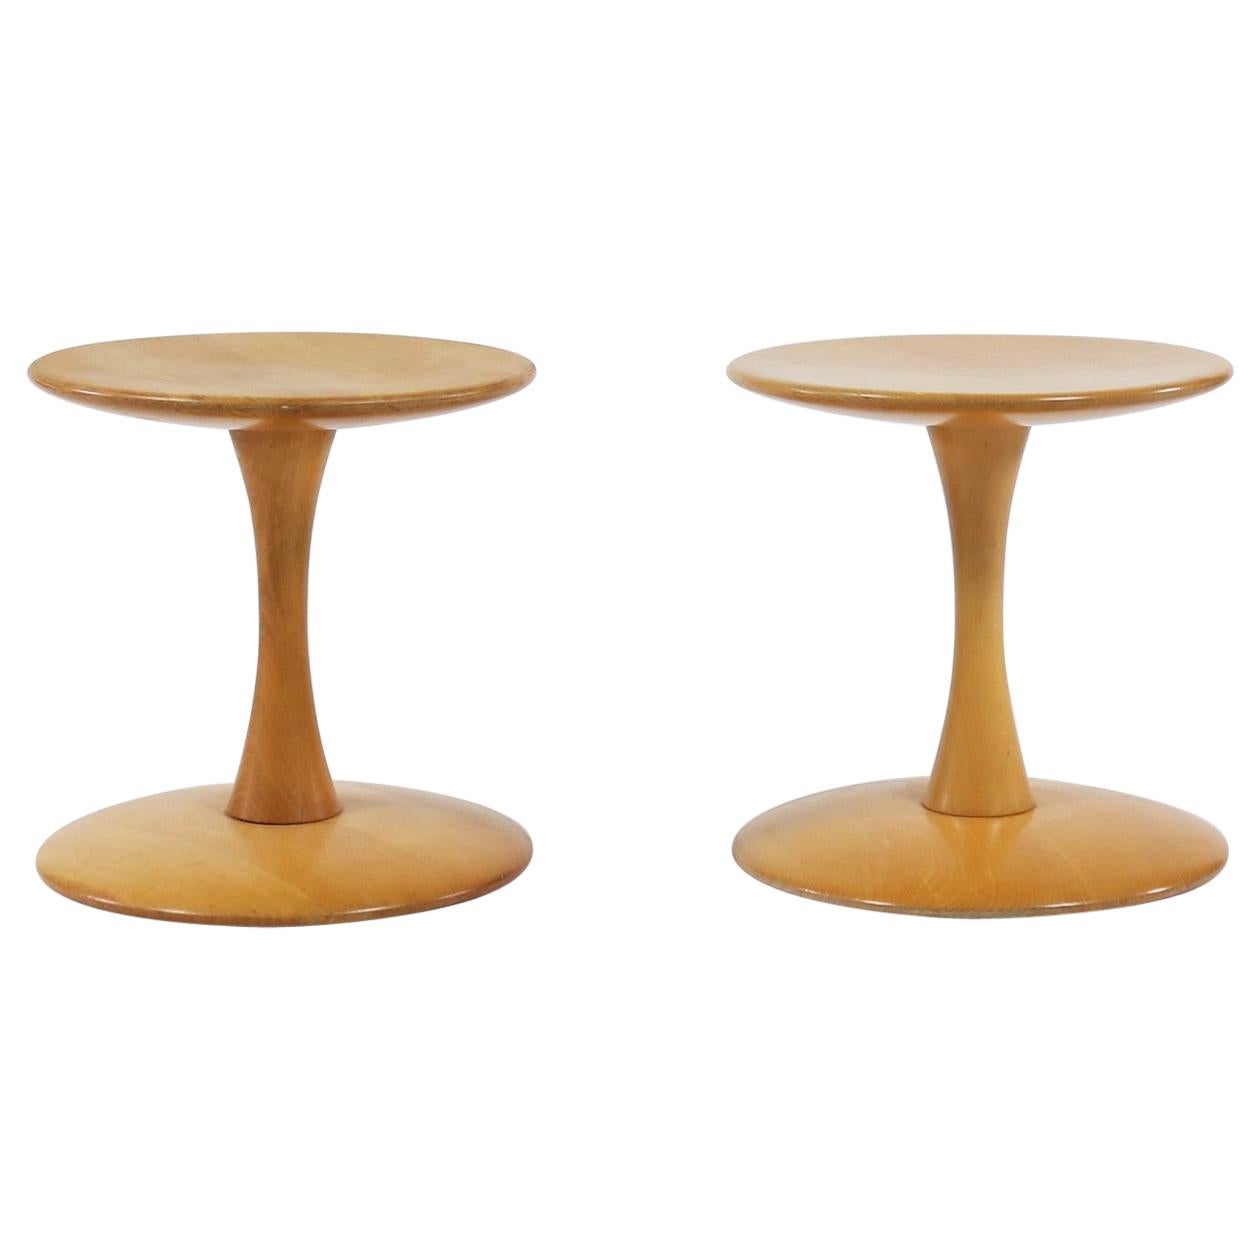 Danish Modern Side Tables or Stools by Nanna Ditzel "Toadstools" in Beech, 1962